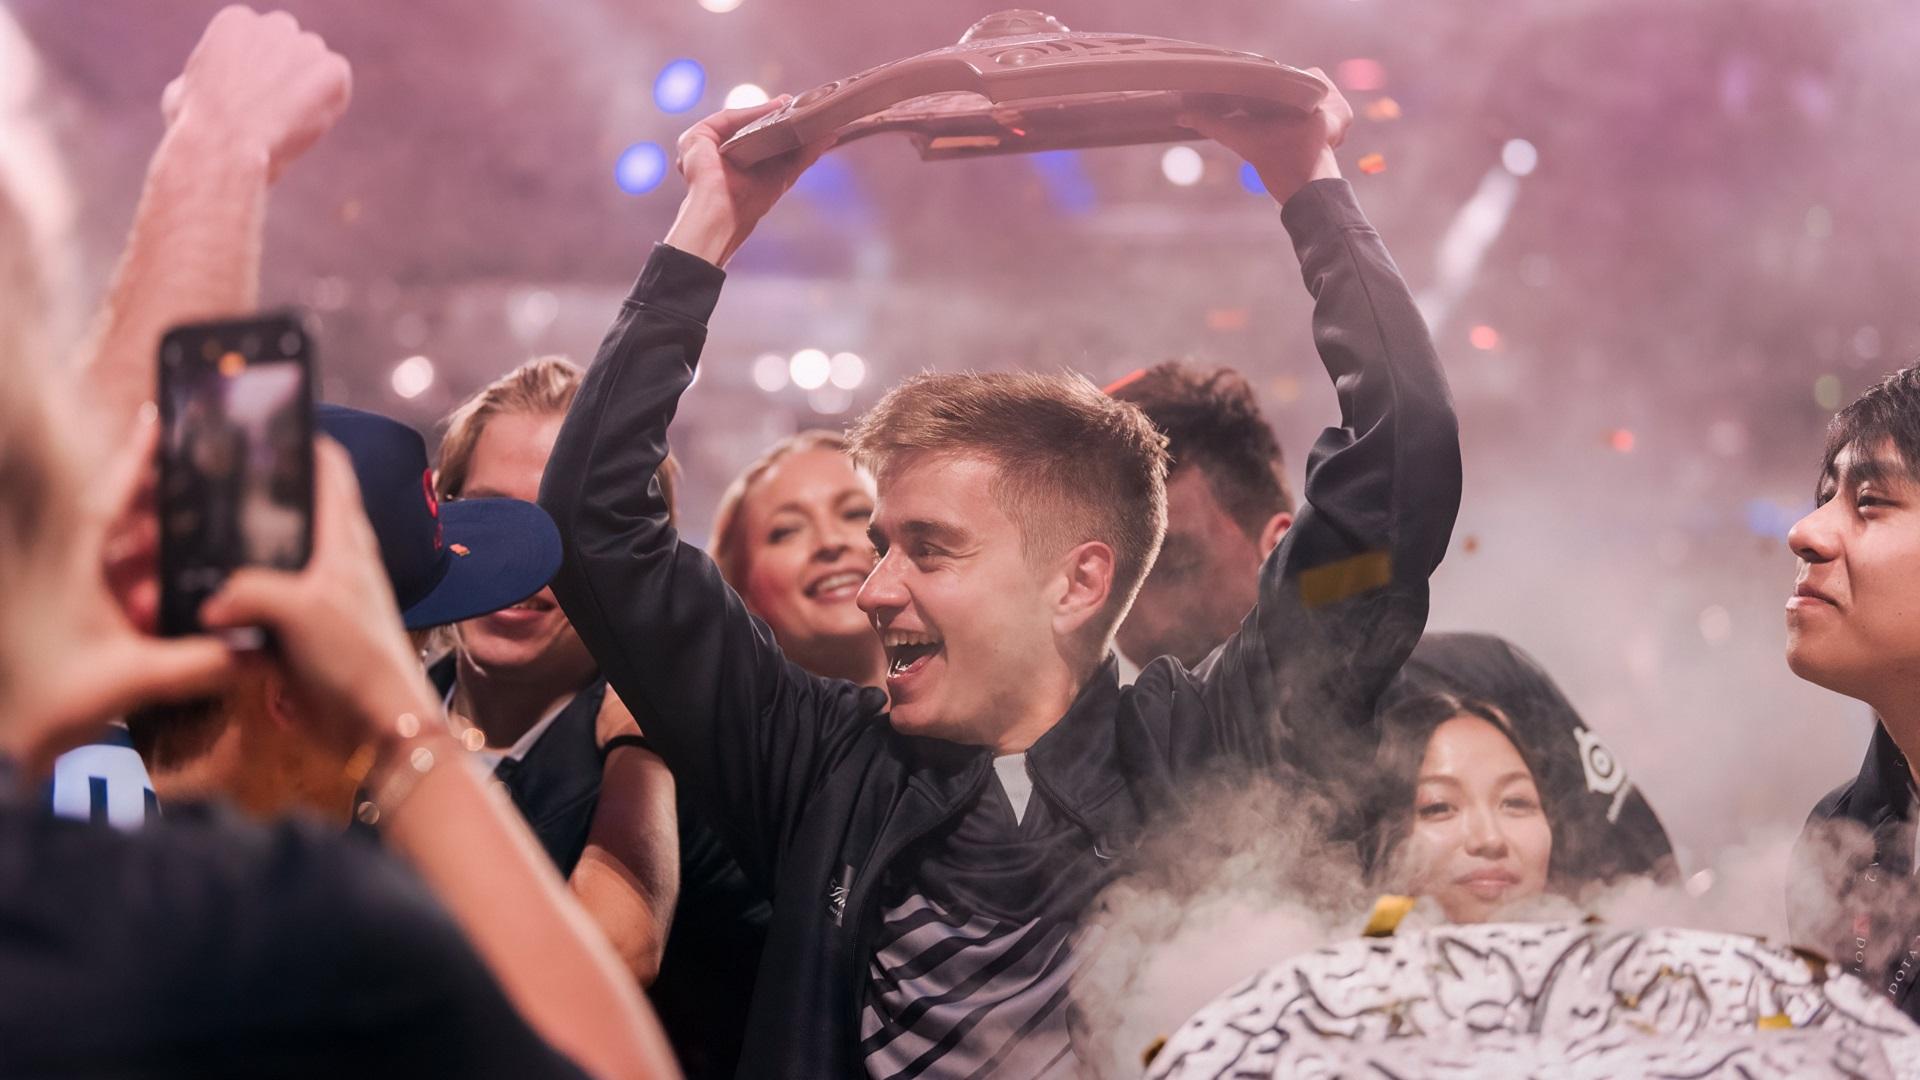 an featuring Johan "n0tail" Sundstein with the Aegis of the Champions trophy after winning TI9.